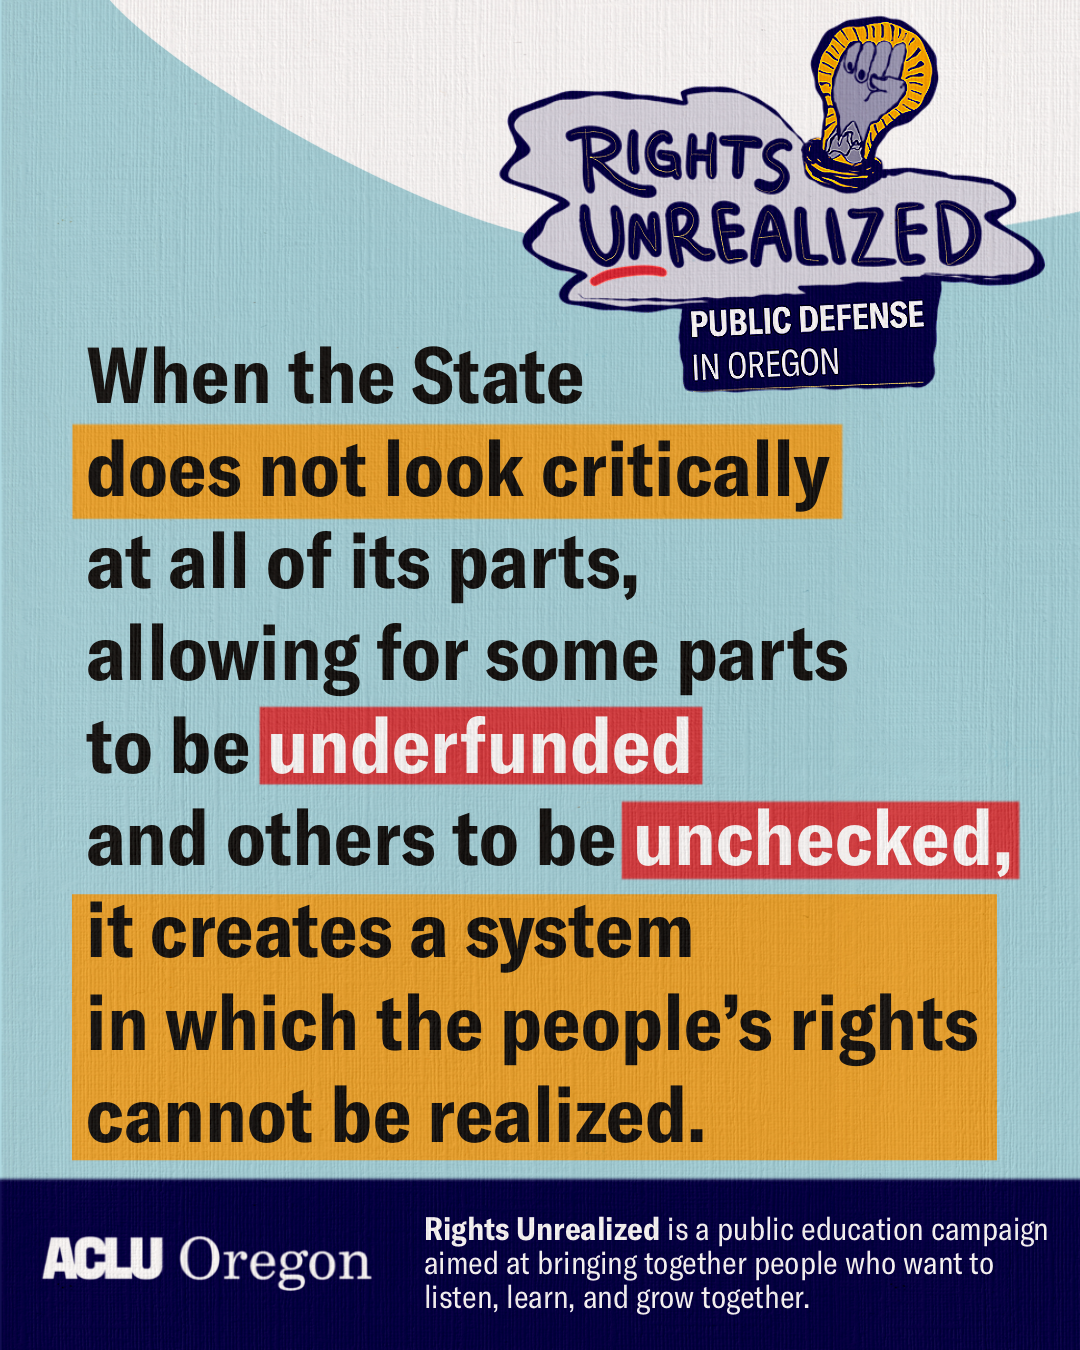 When the state does not look critically at all of its parts, allowing for some parts to be underfunded and others to be unchecked, it creates a system in which the people's rights cannot be realized.